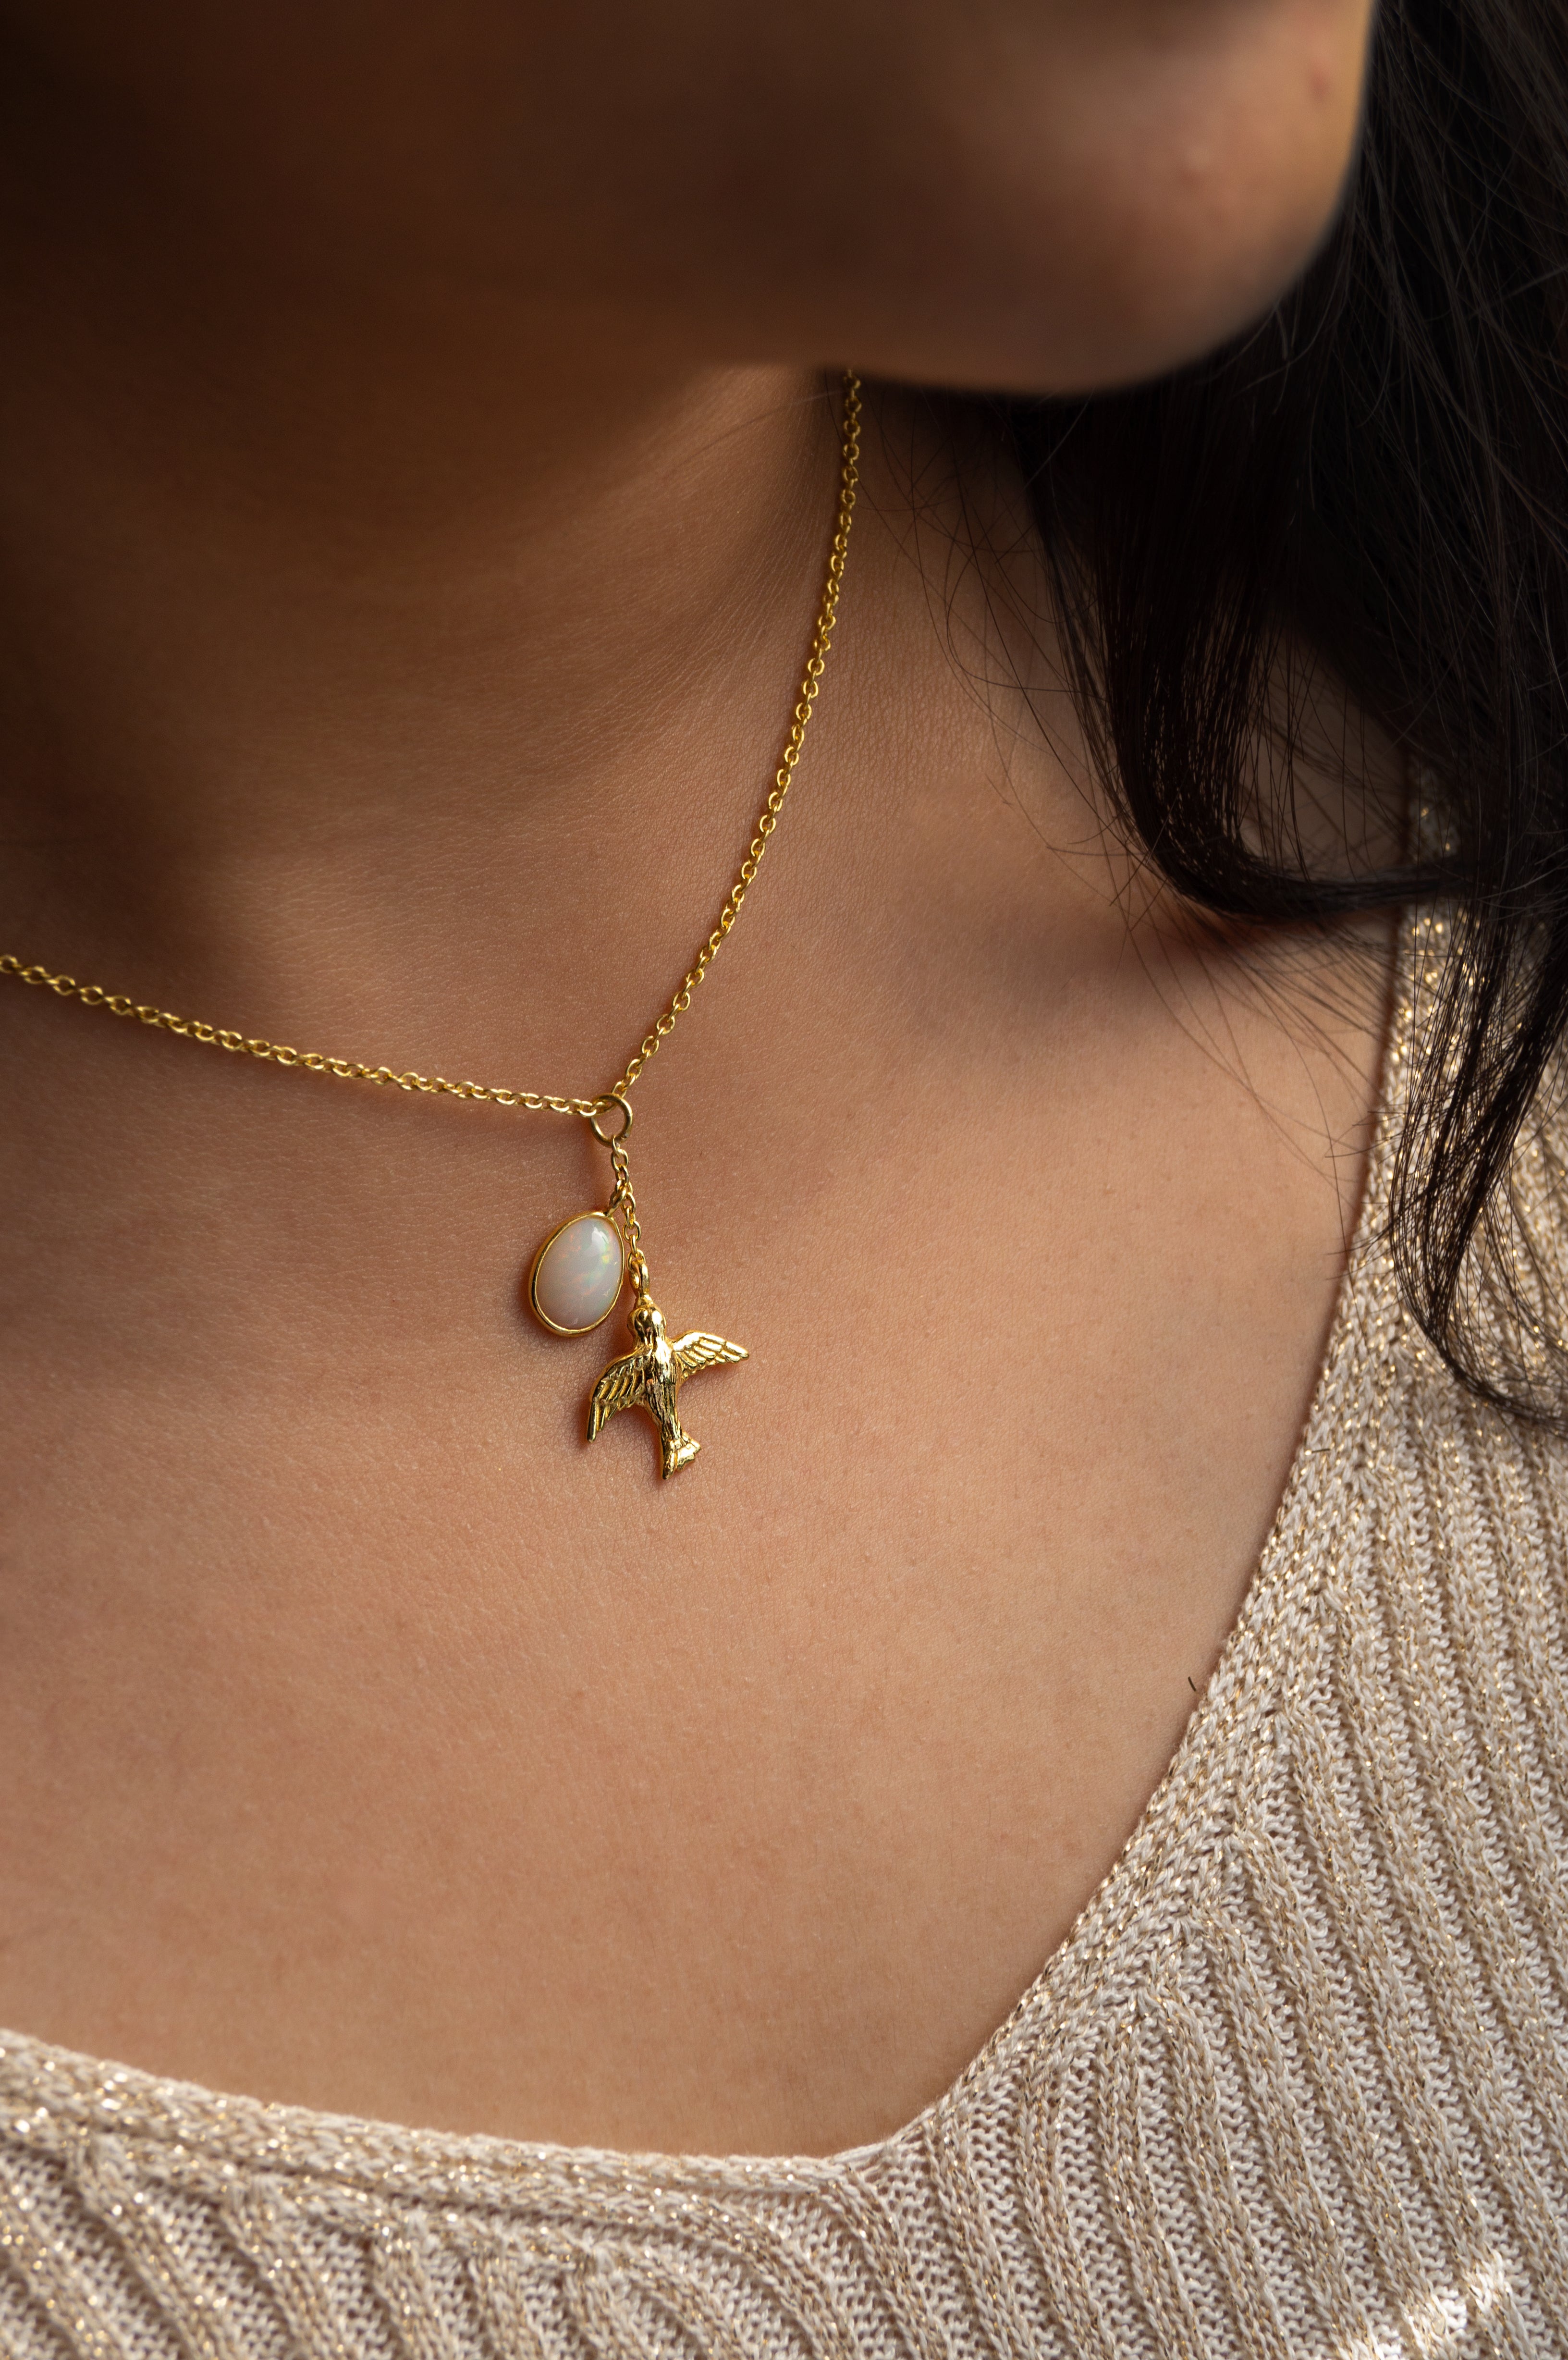 Gold Plated Airplane Necklace